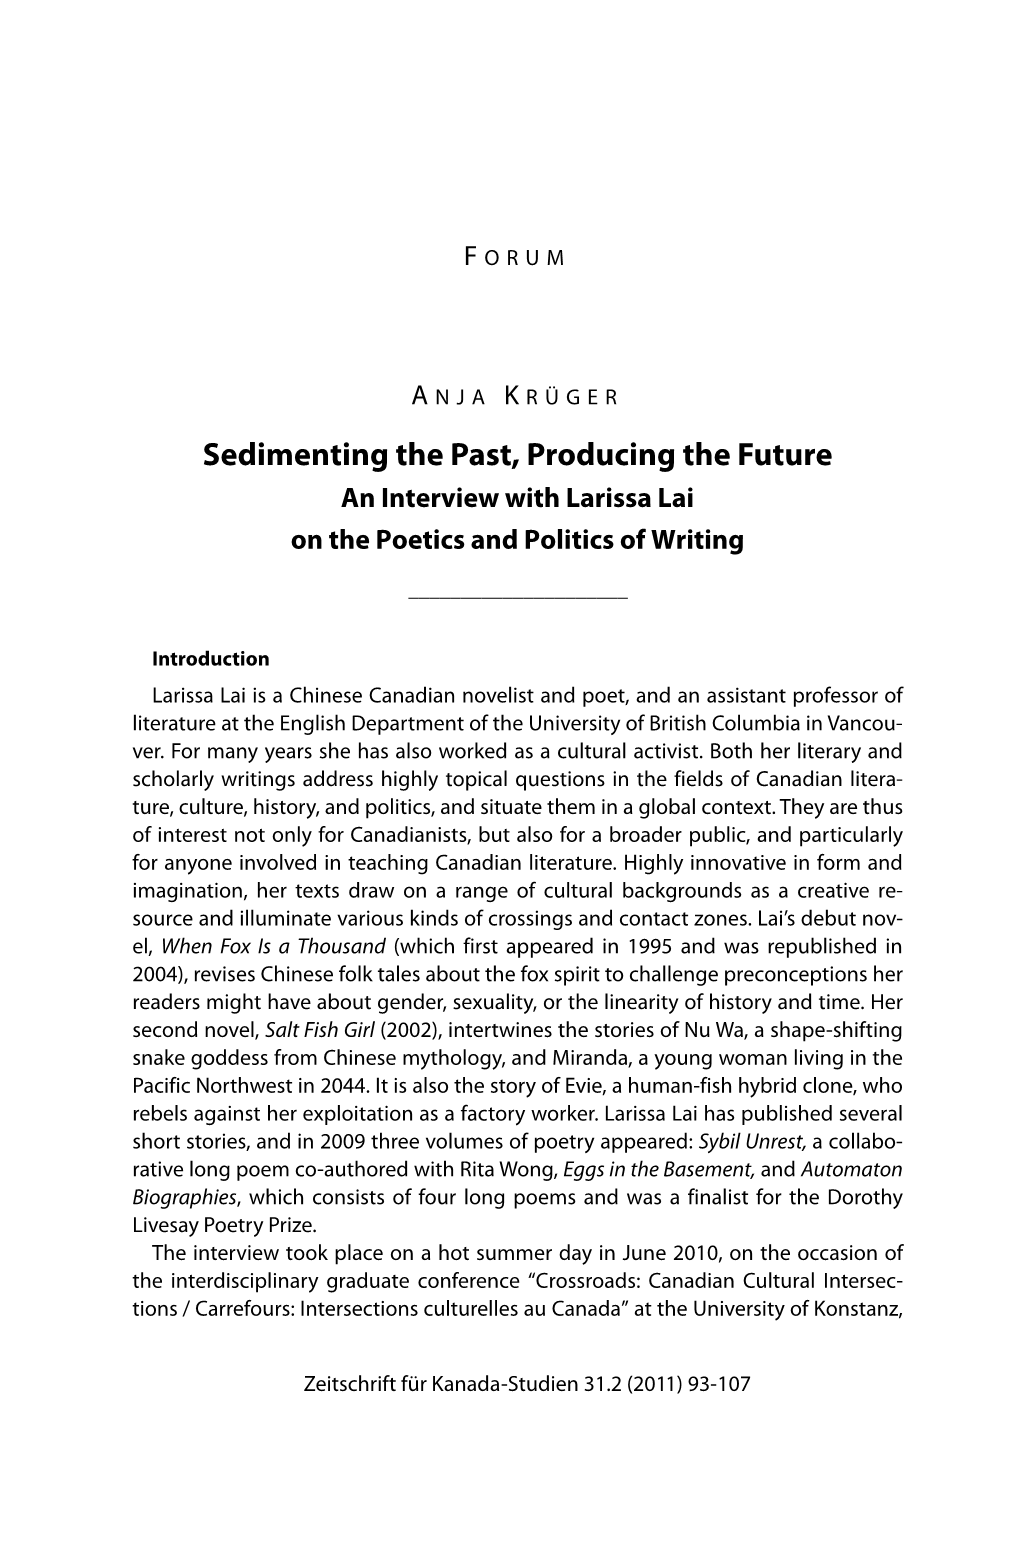 Sedimenting the Past, Producing the Future an Interview with Larissa Lai on the Poetics and Politics of Writing